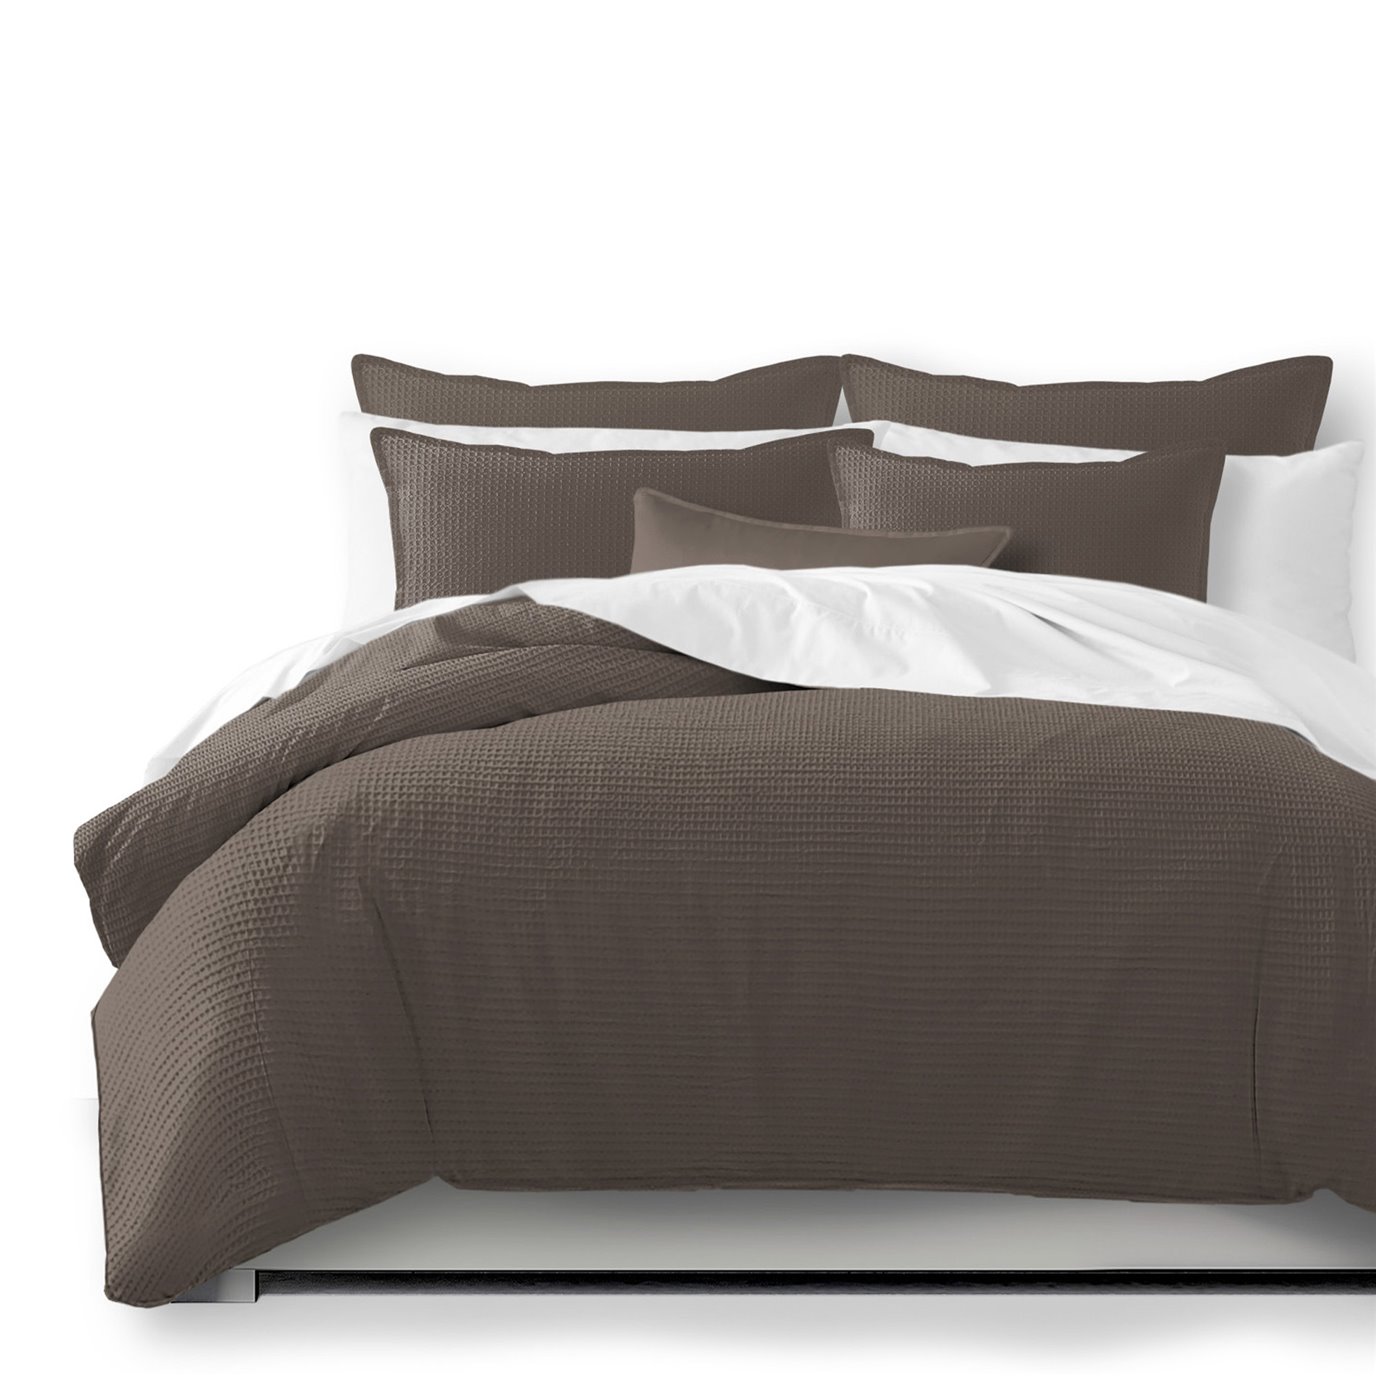 Classic Waffle Mocca Duvet Cover and Pillow Sham(s) Set - Size Queen